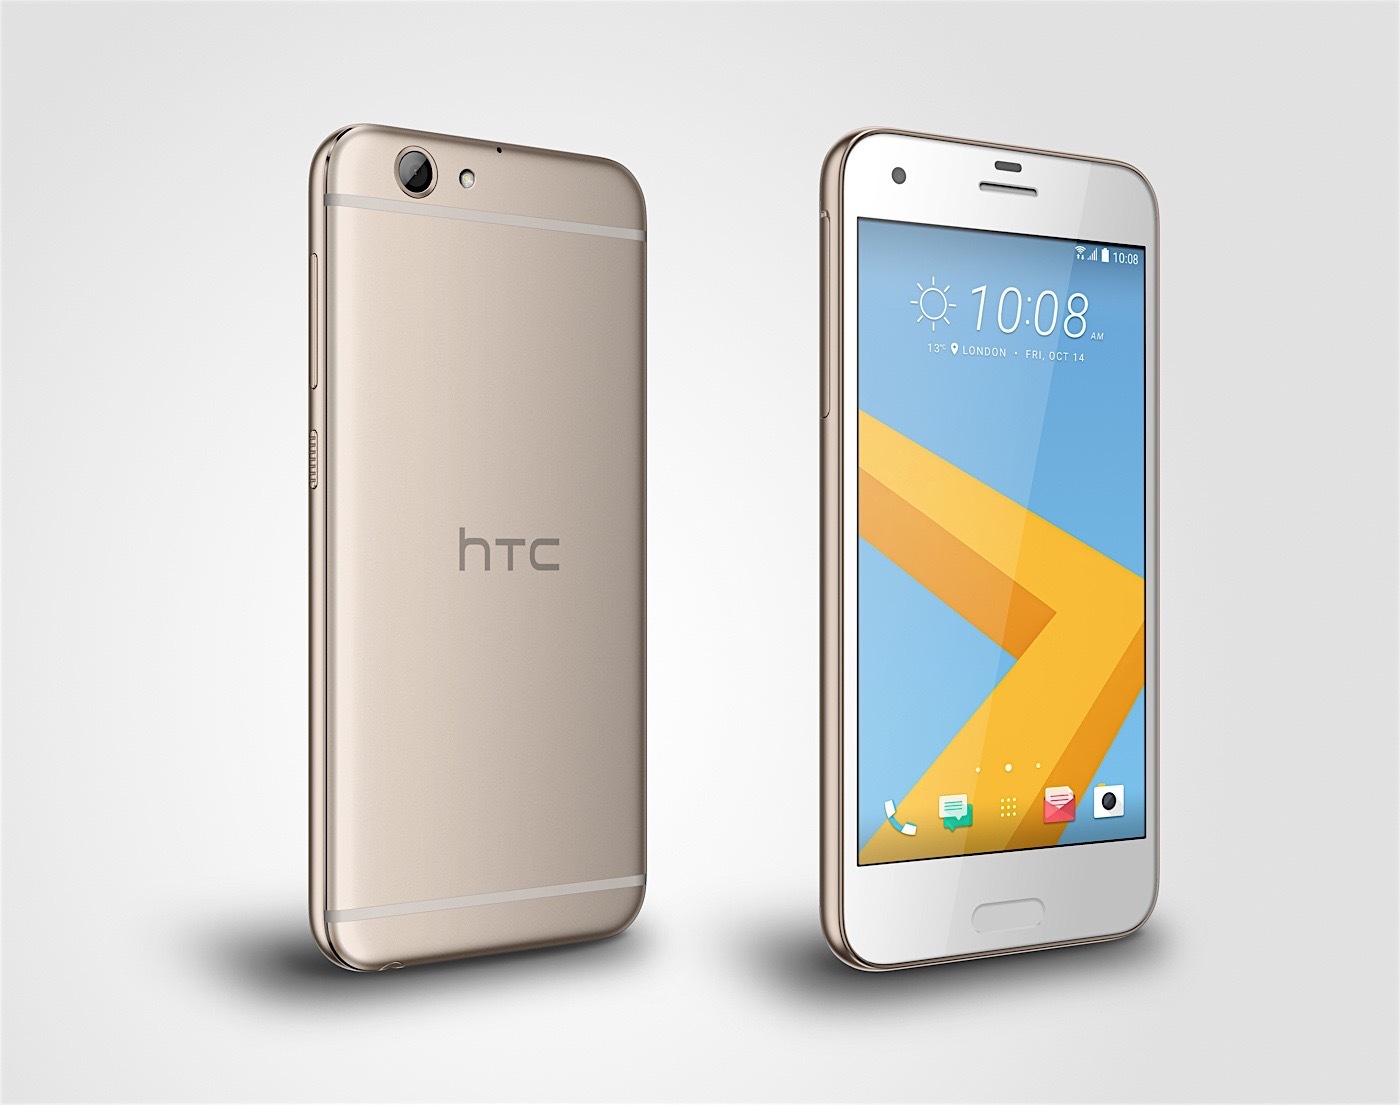 E36 - HTC One A9s - Handset - Image - Global